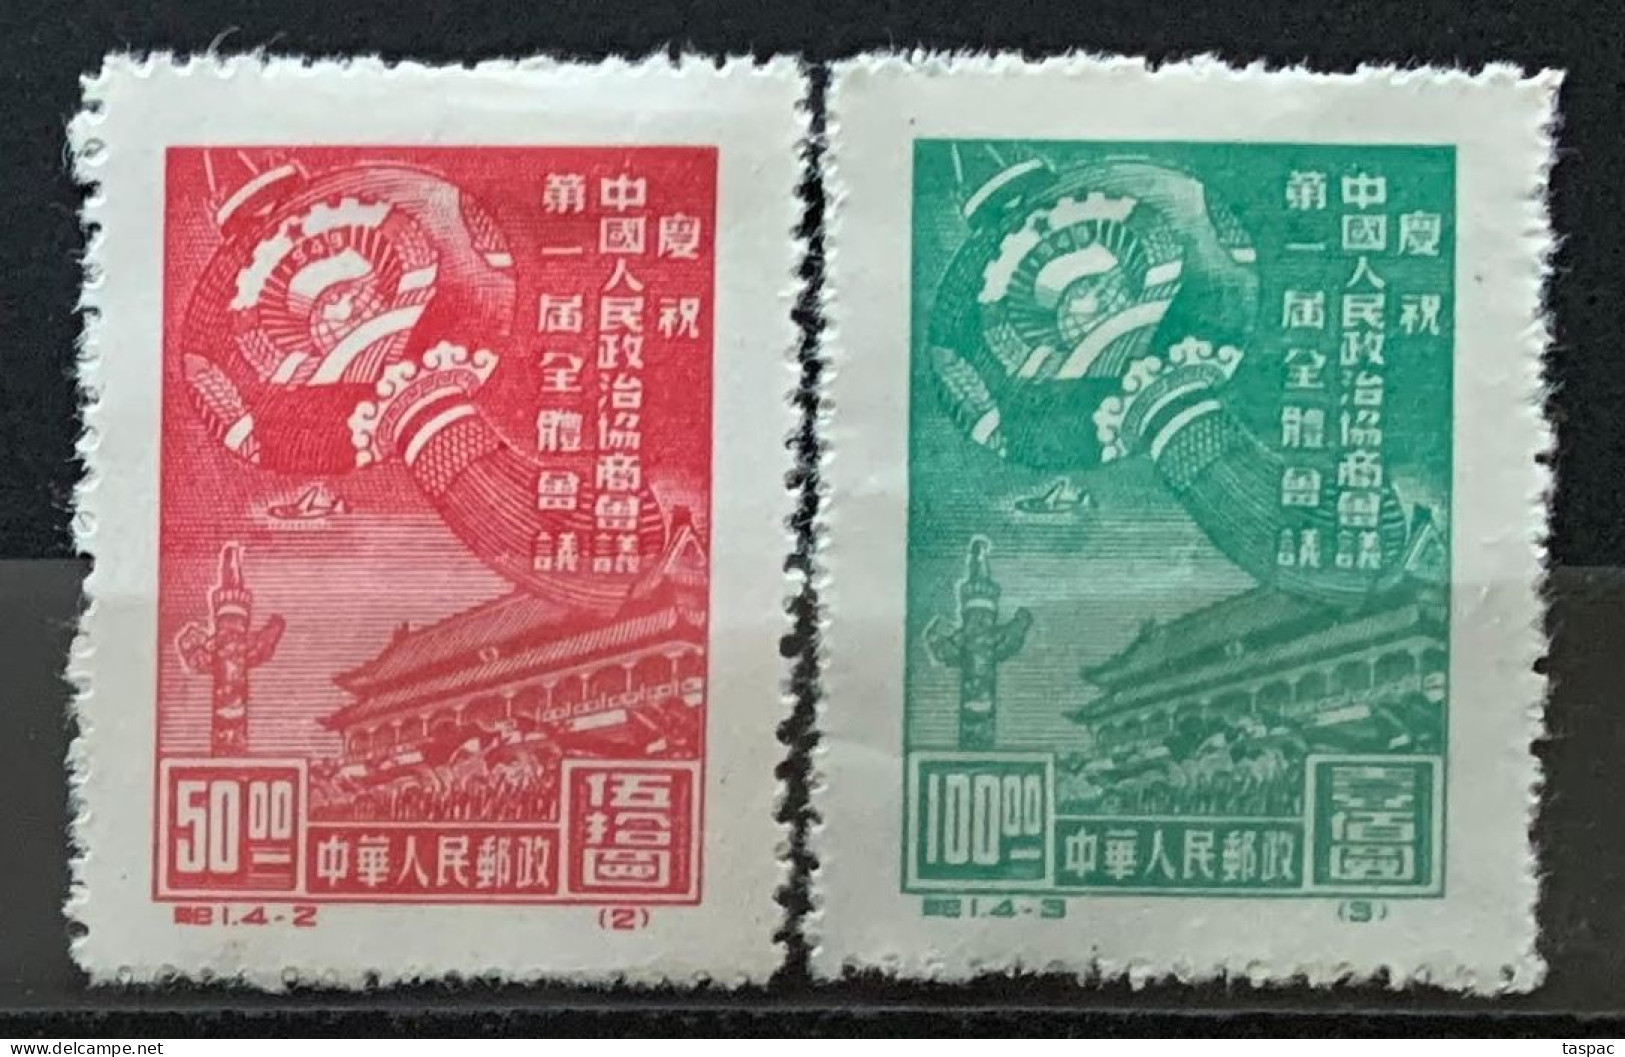 China P.R. 1949 Mi# 2-3 II (*) Mint No Gum, Hinged - Short Set - Reprints - Lantern And Gate Of Heavenly Peace - Reimpresiones Oficiales